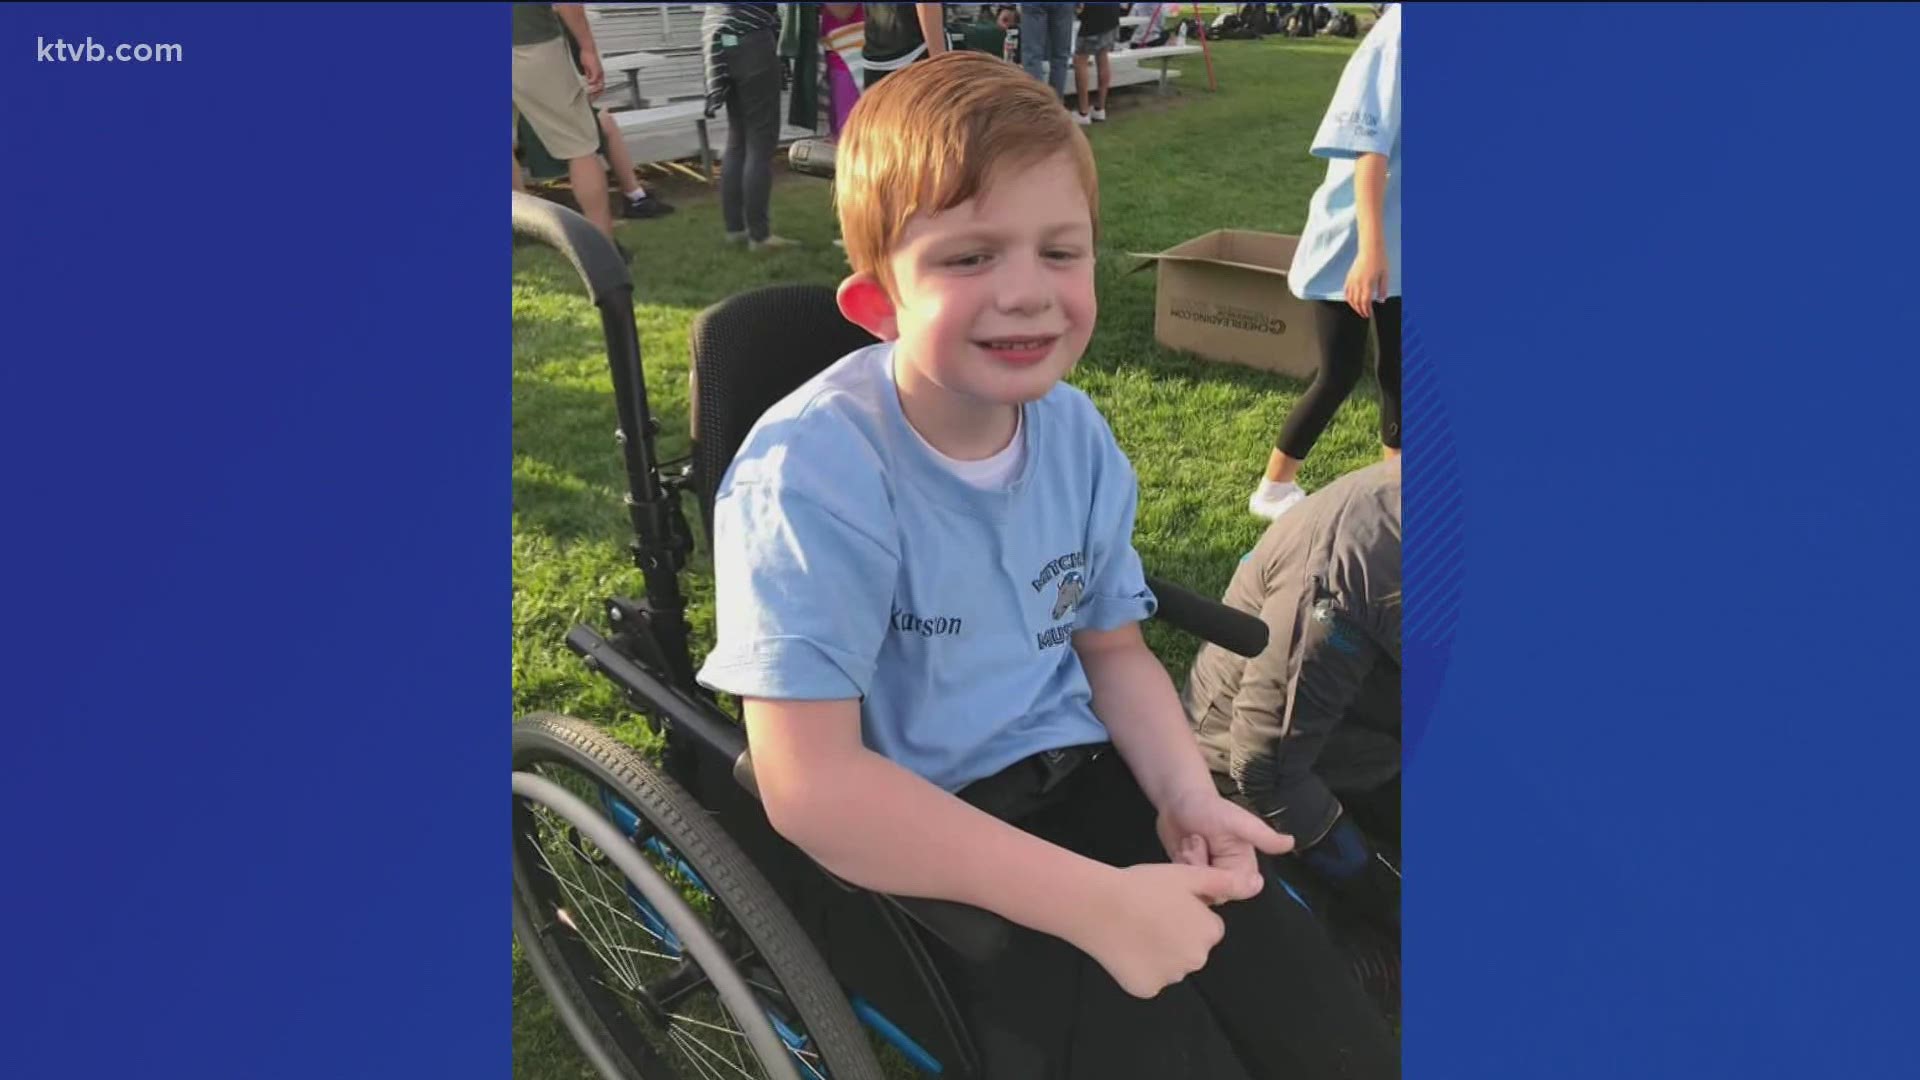 The Fox family totaled their original van in an accident. The community came together to get them a new van that would accommodate their young son’s wheelchair.